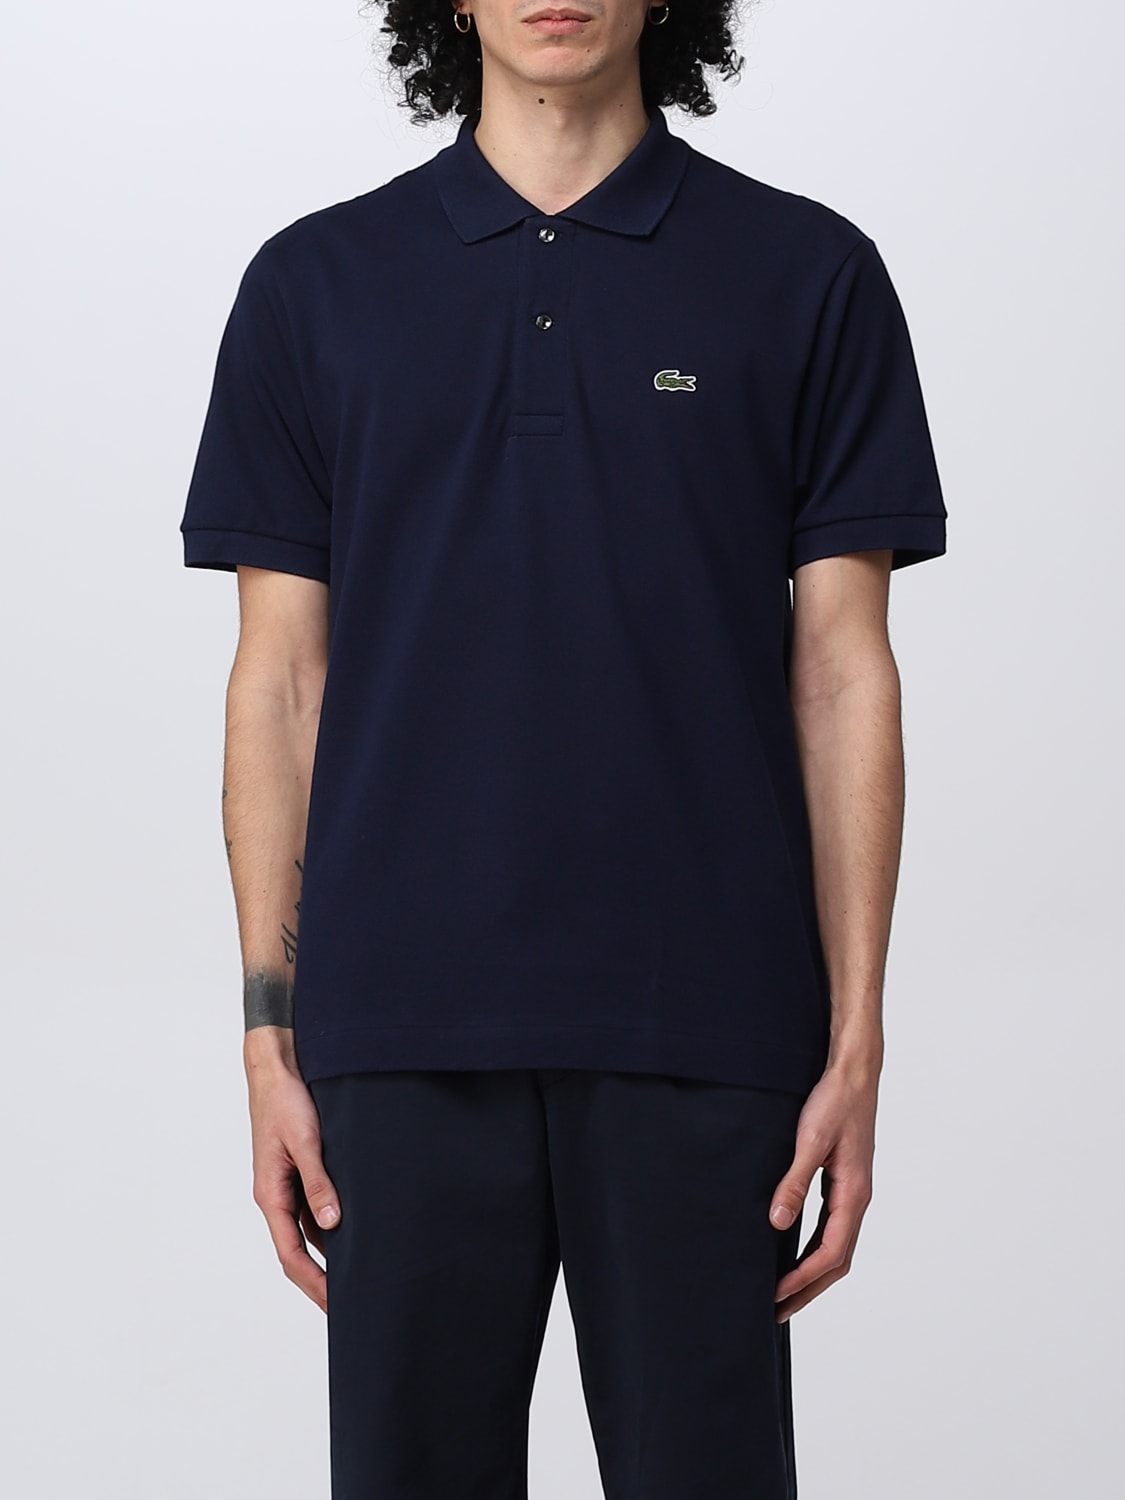 Lacoste Outlet: polo shirt for man - Navy Lacoste polo shirt L1212 online at GIGLIO.COM